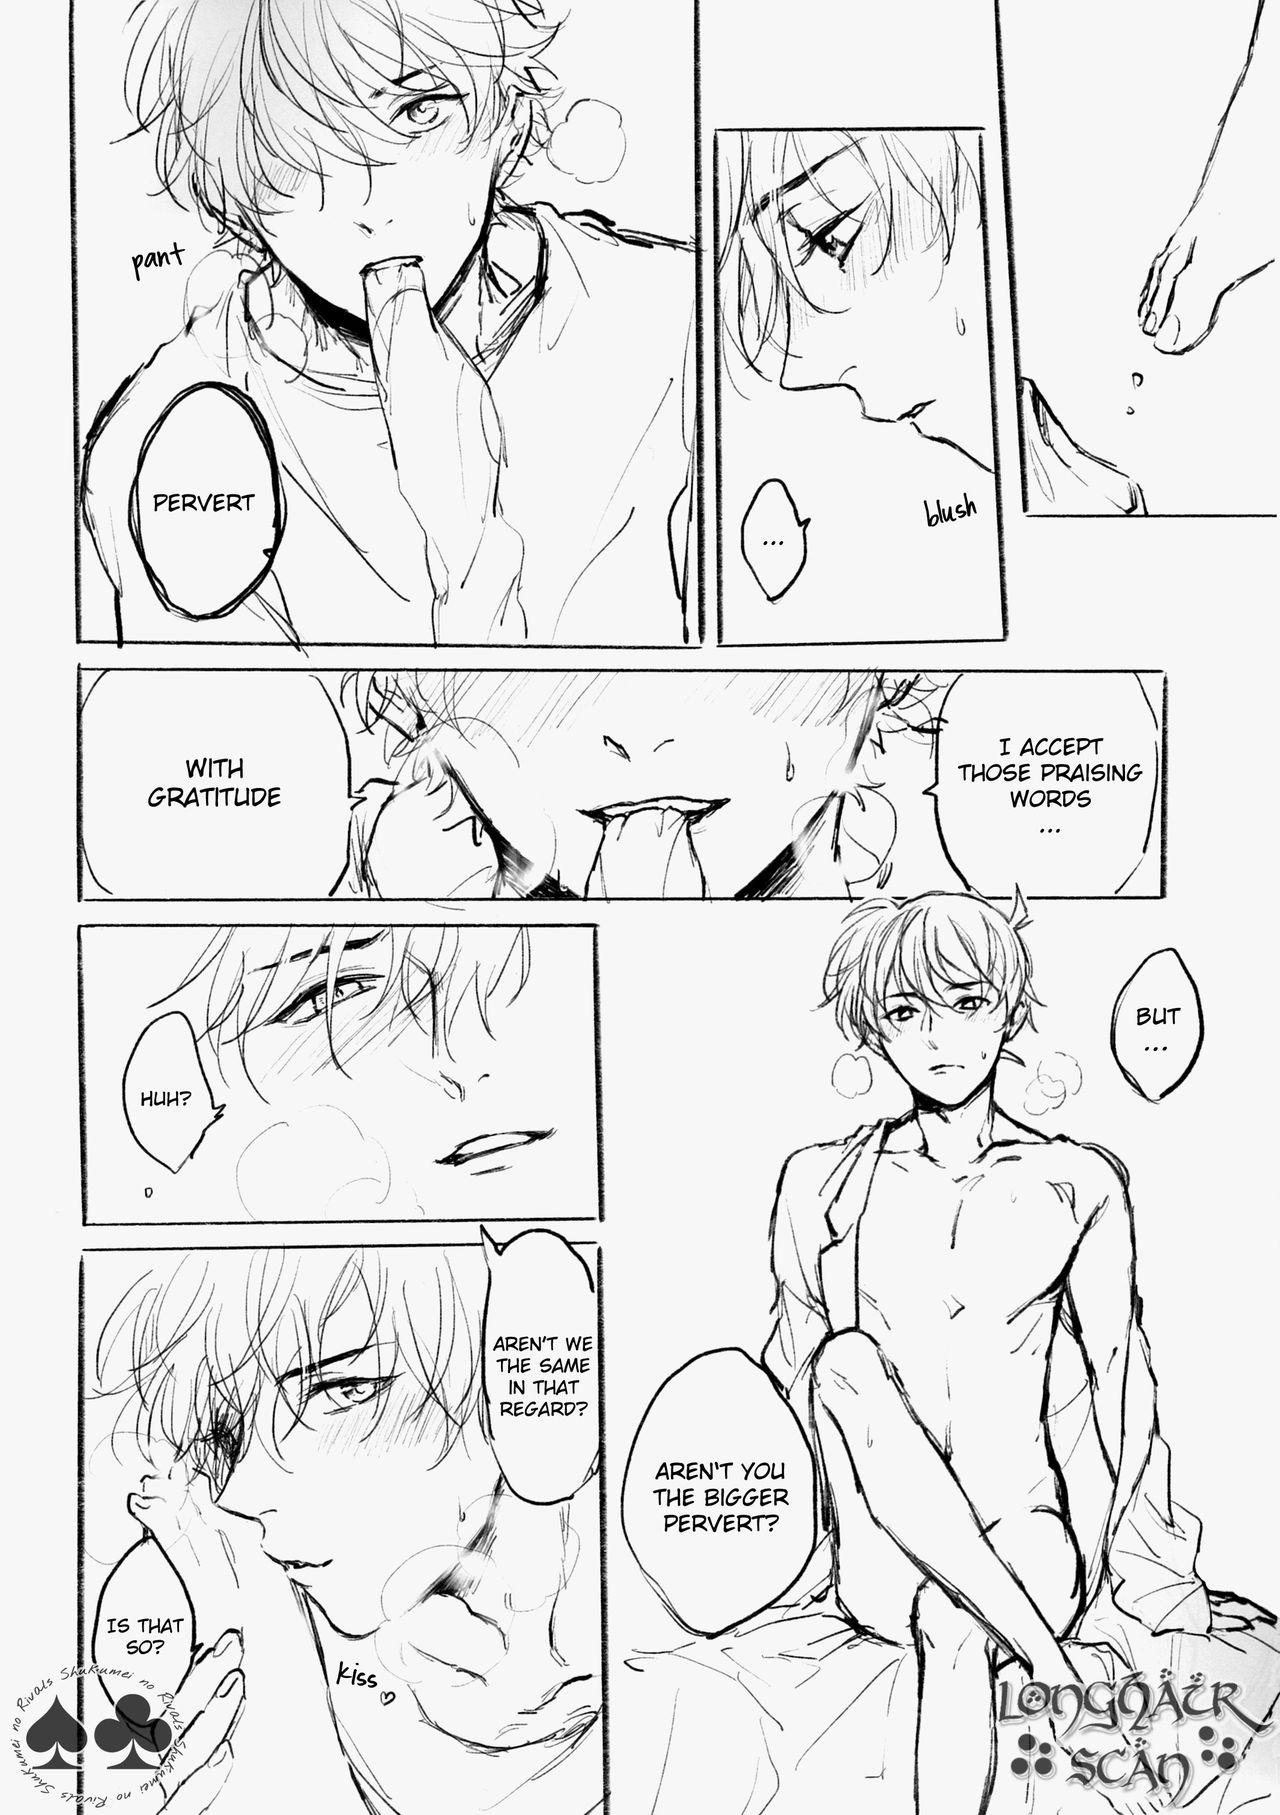 Best Blowjob Ever WALLOW - Detective conan Nudity - Page 4